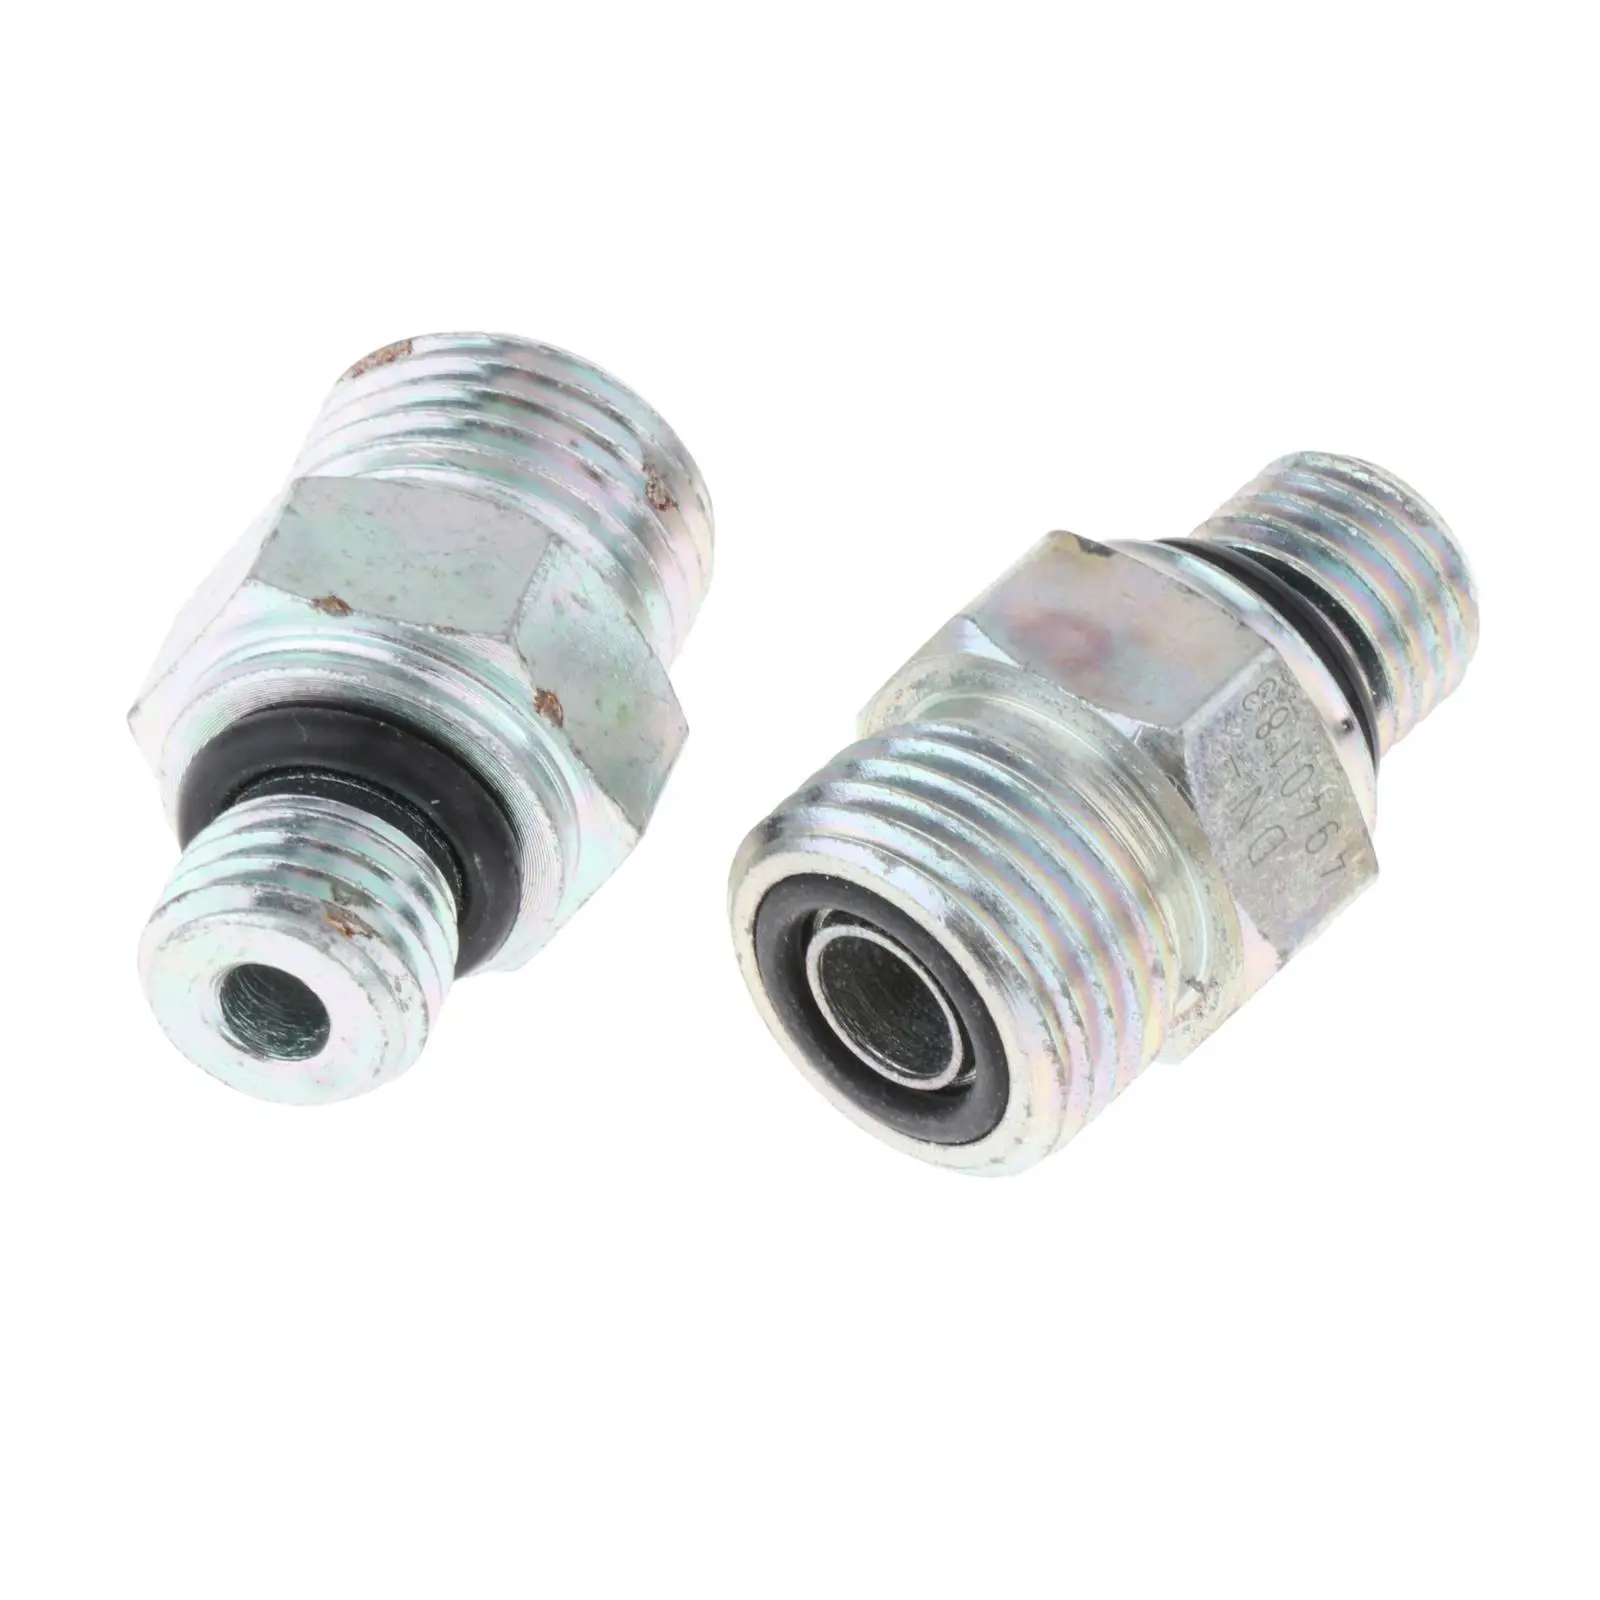 2x with O Rings Turbo Oil feed Line Fitting for Automotive Engine